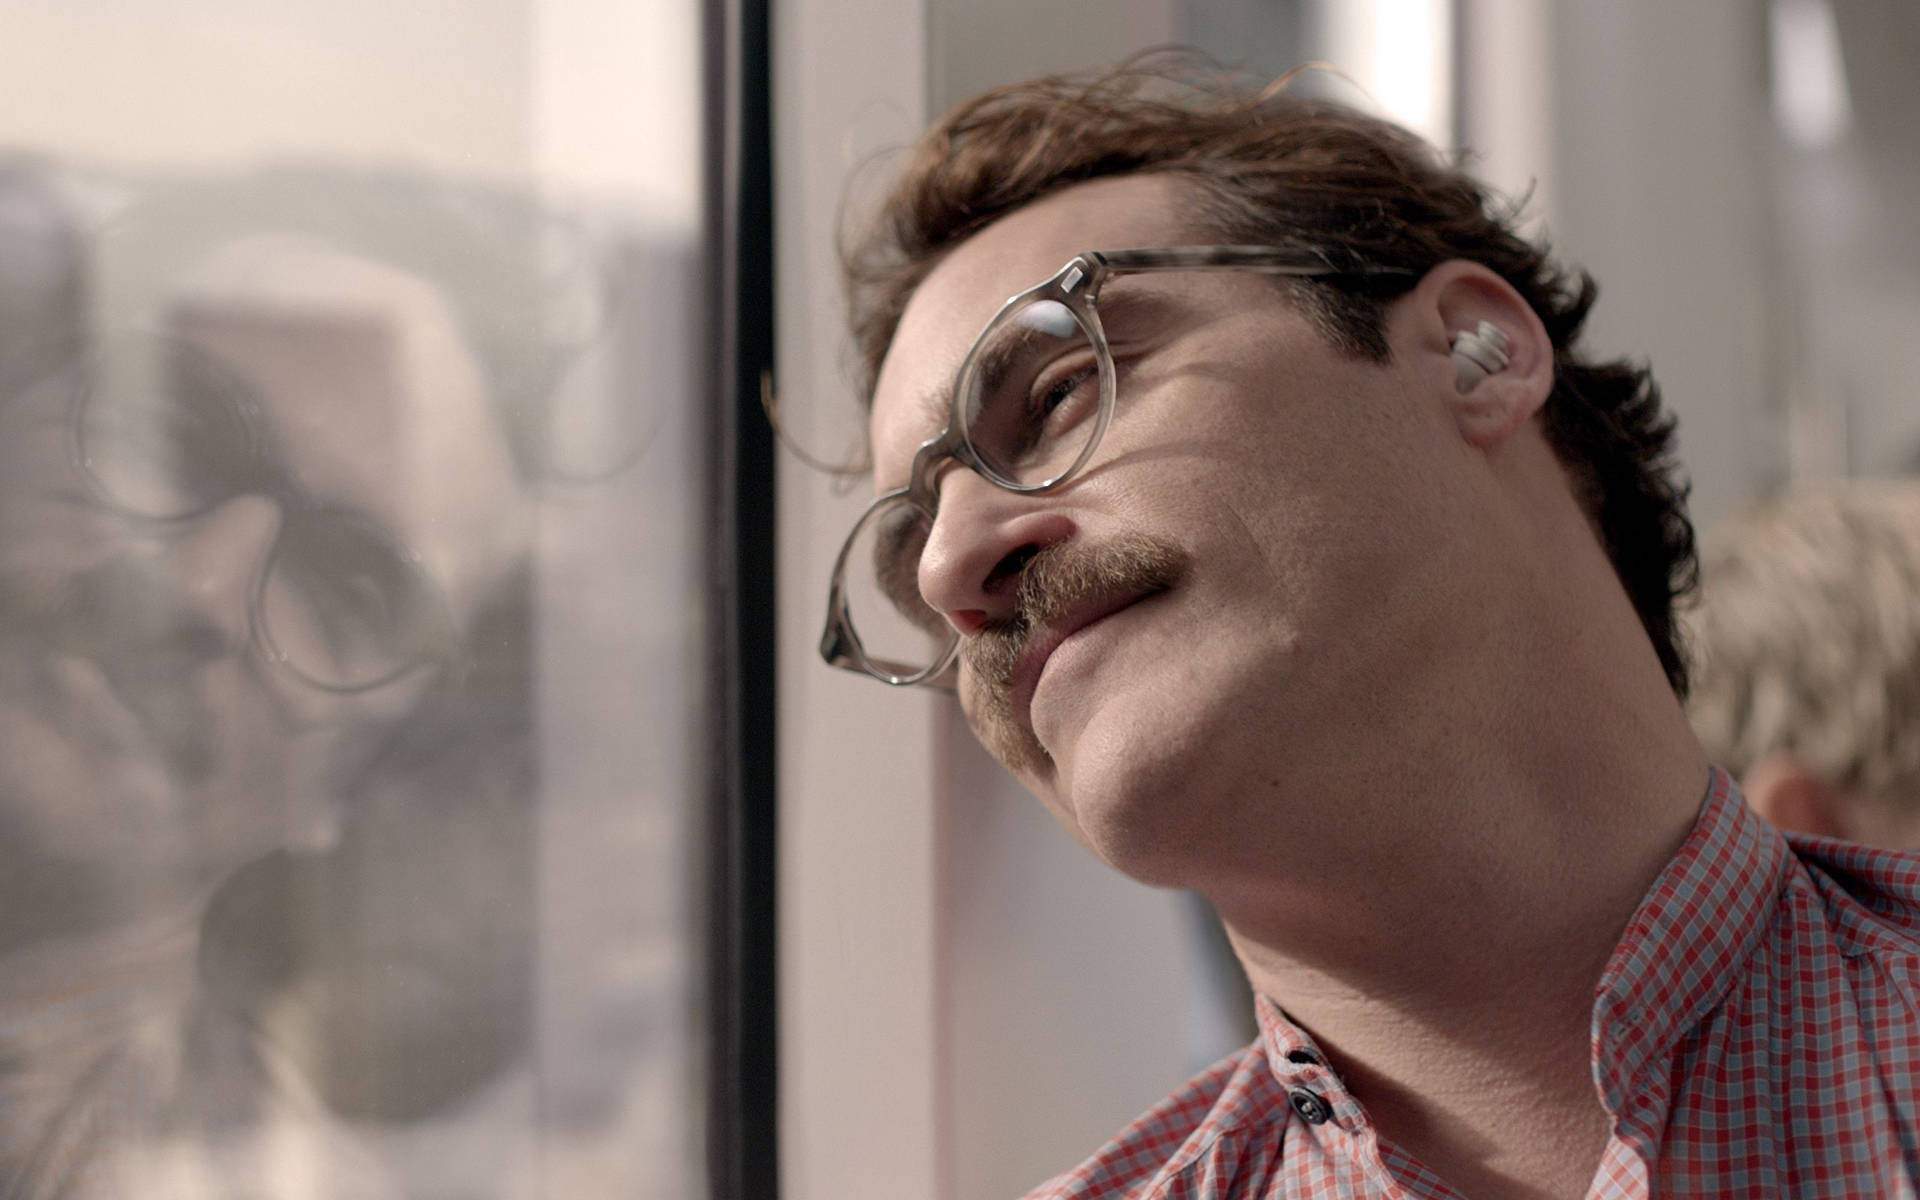 Joaquin Phoenix as Theodore Twombly in the movie "Her" Wallpaper